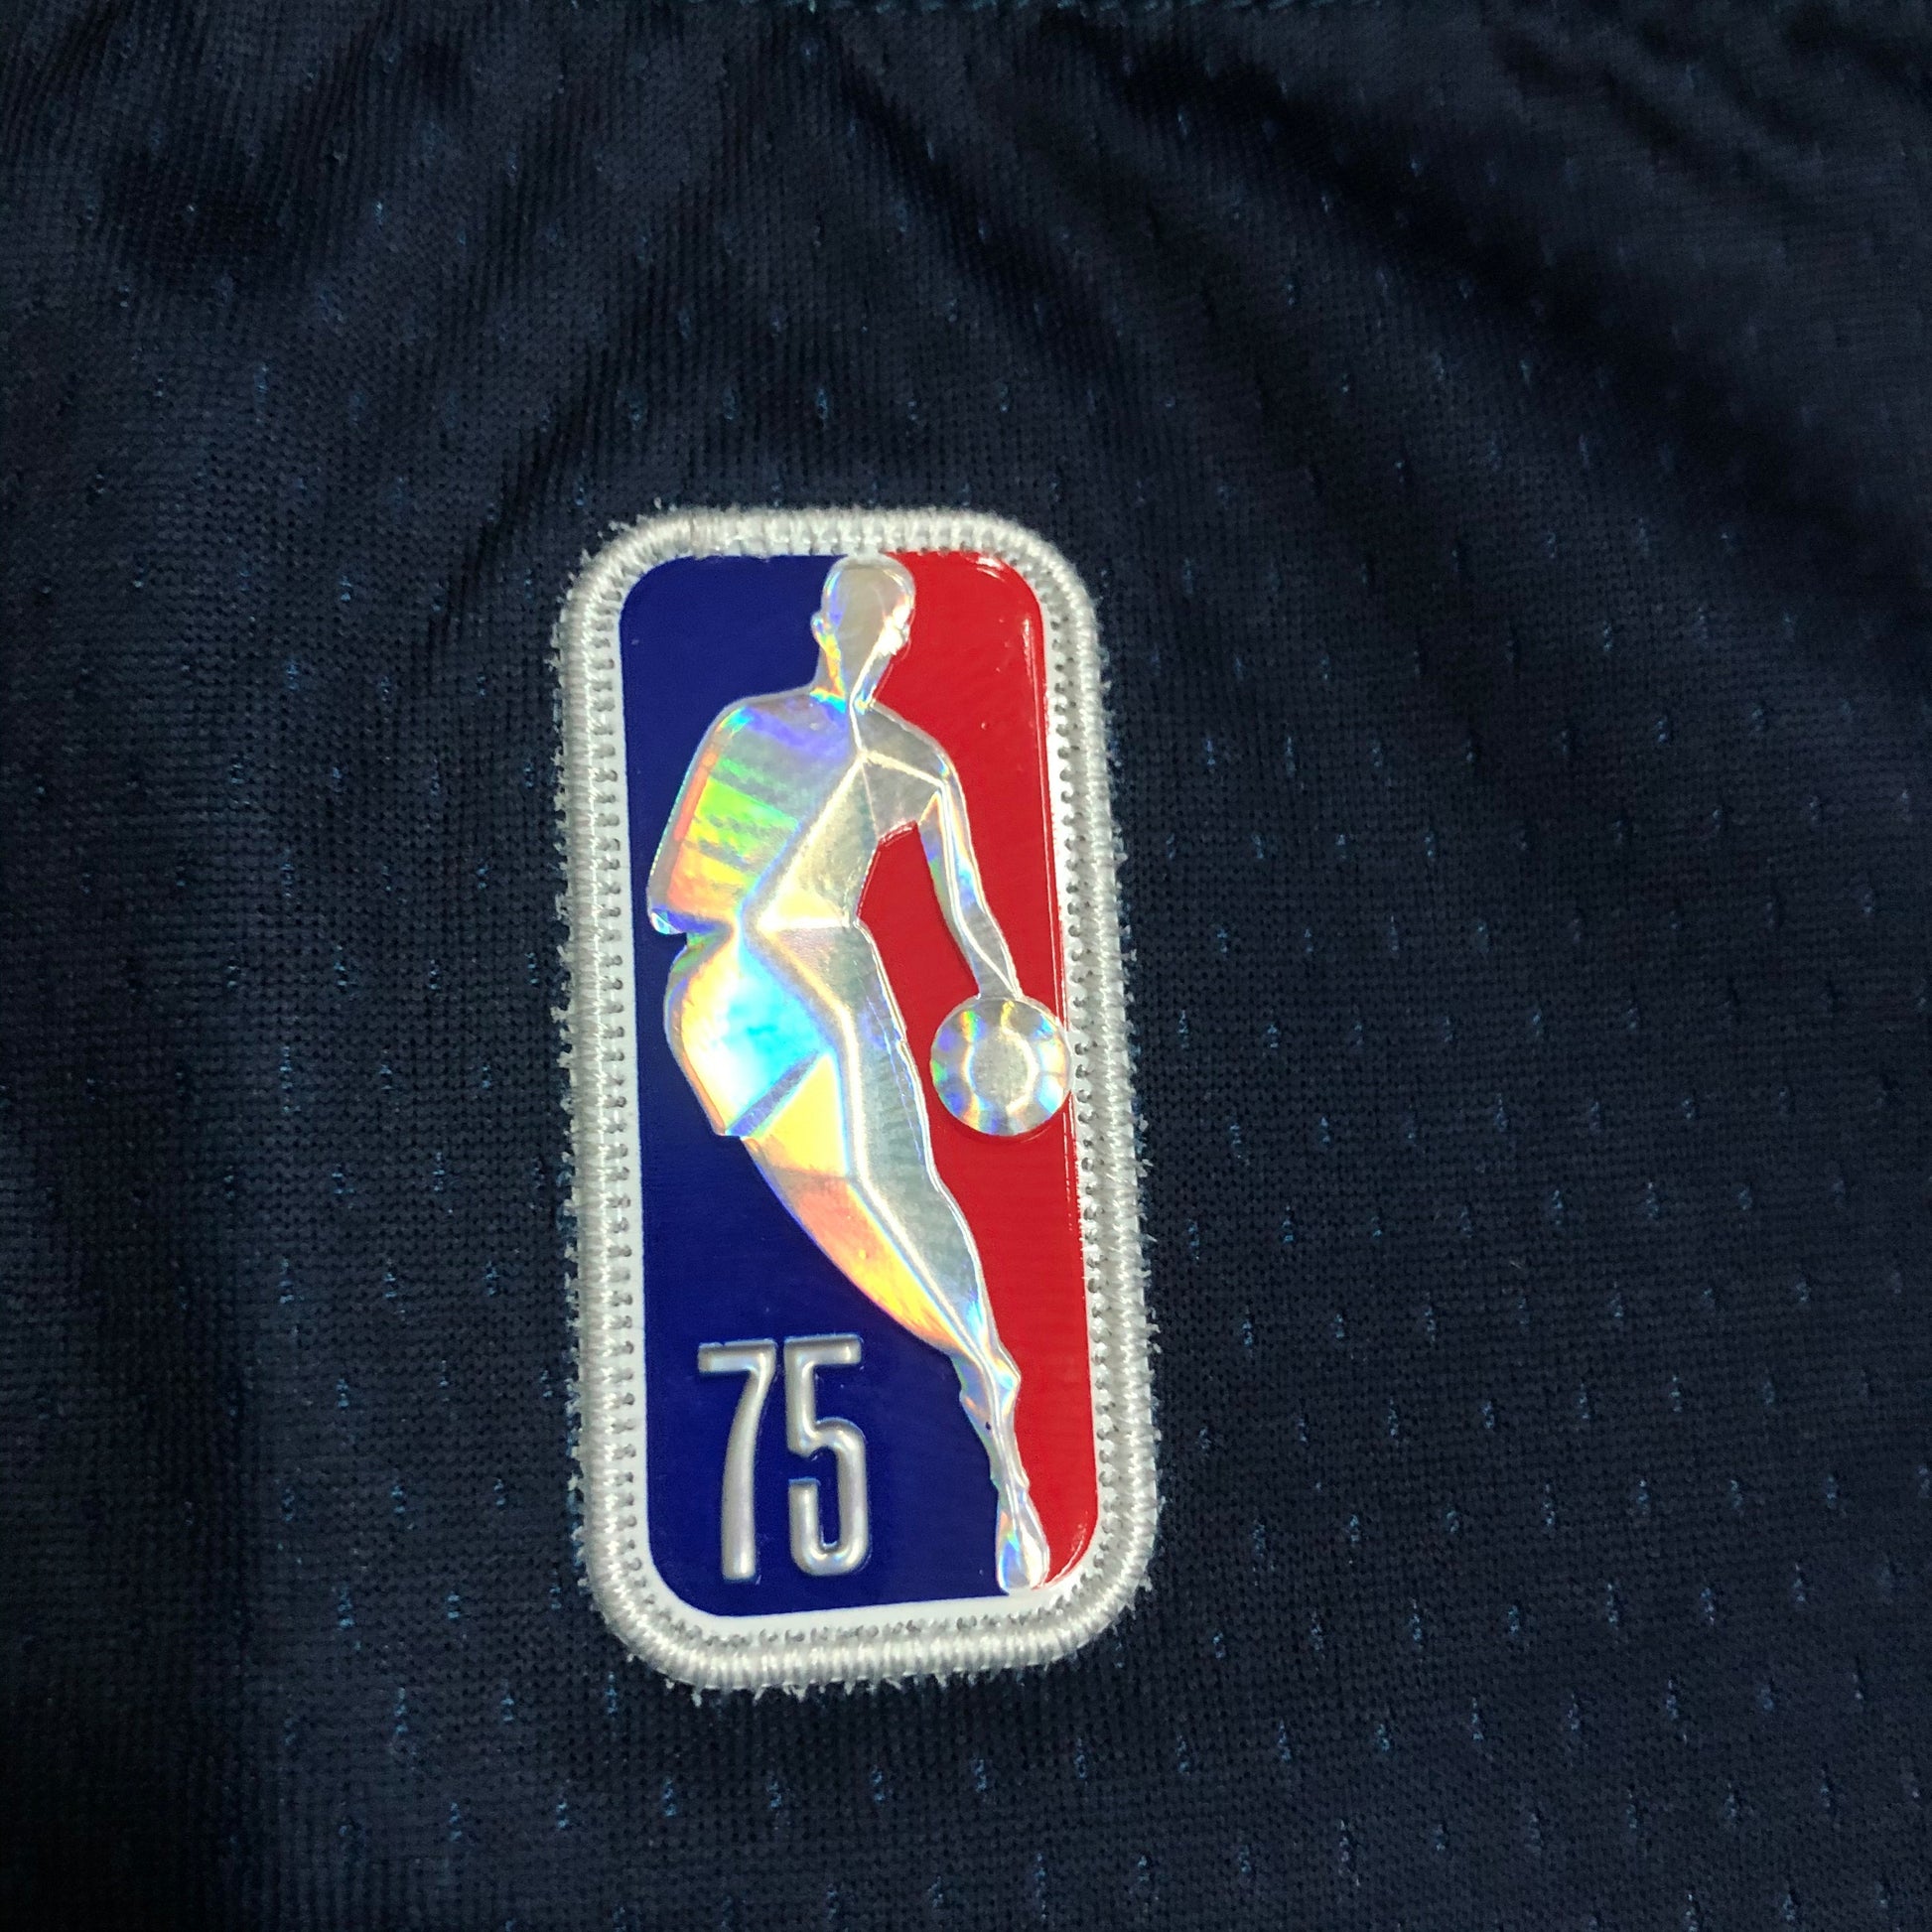 NBA_ Jersey Minnesota Timberwolves''Men D'Angelo Russell Anthony Edwards  Karl-Anthony Towns McKinley Wright IV Custom 75th Anniversary Anthracite  Jersey 